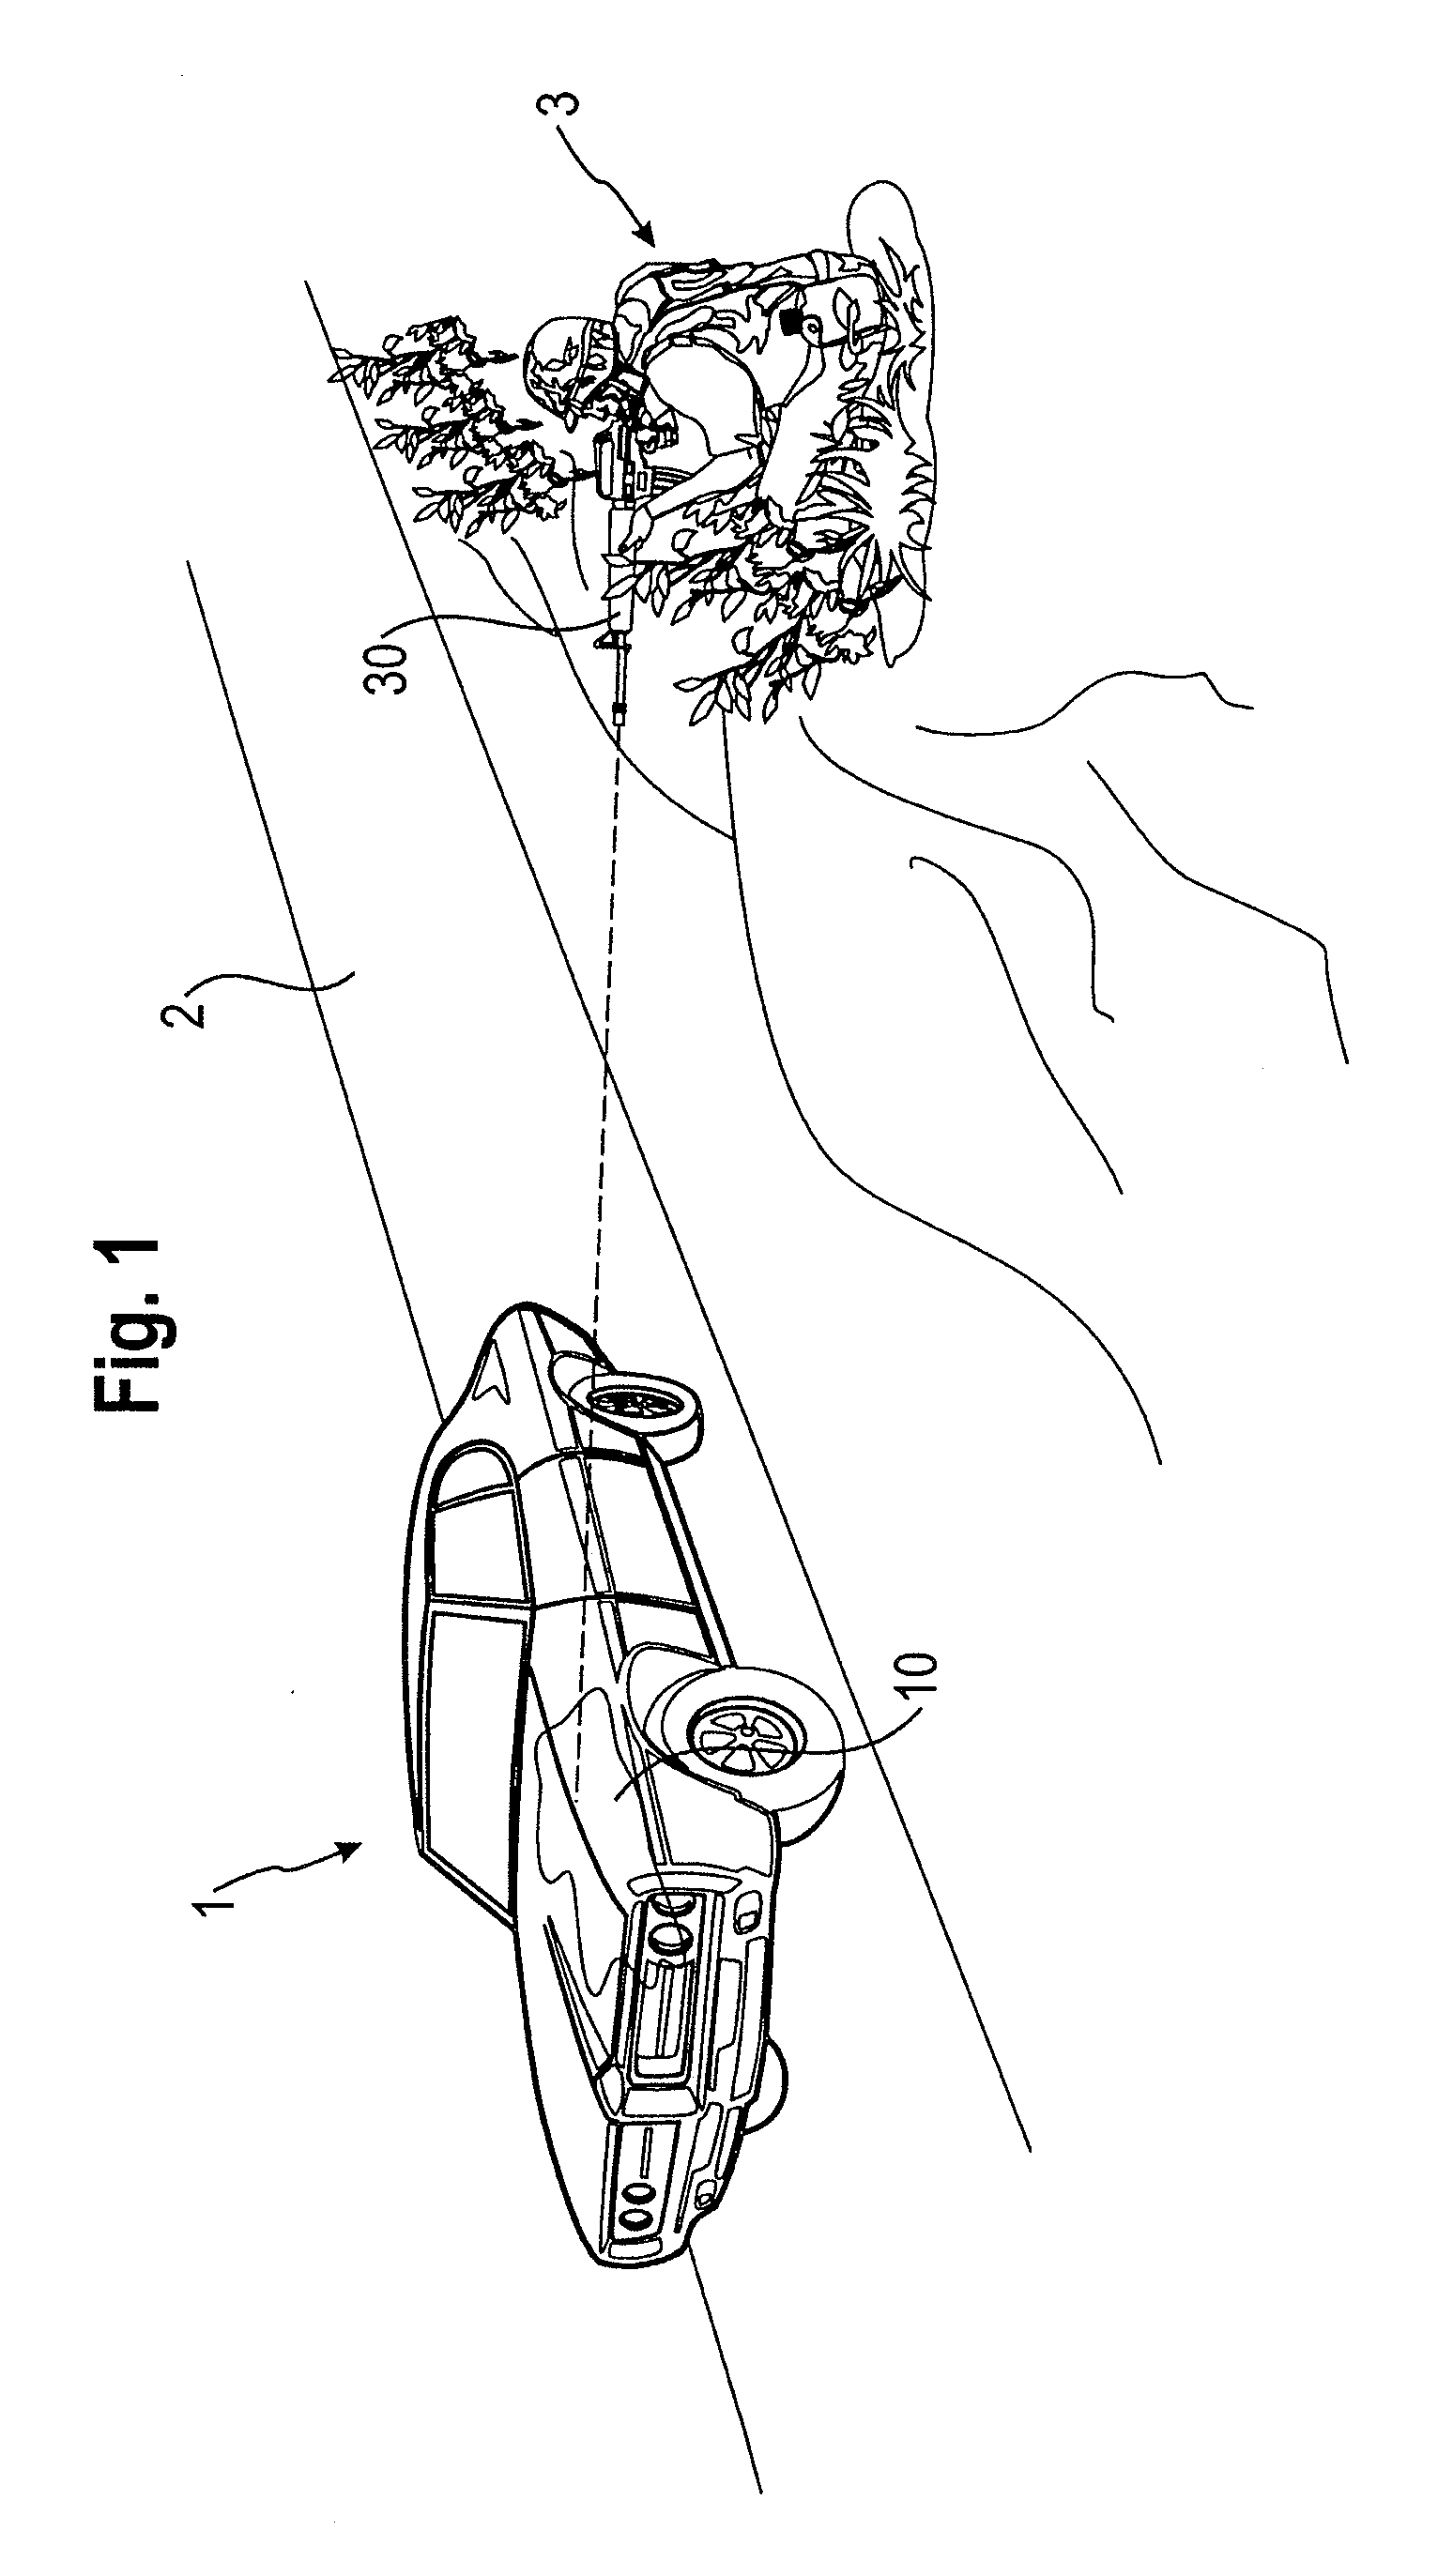 Method and Device for Tracking a Moving Target Object